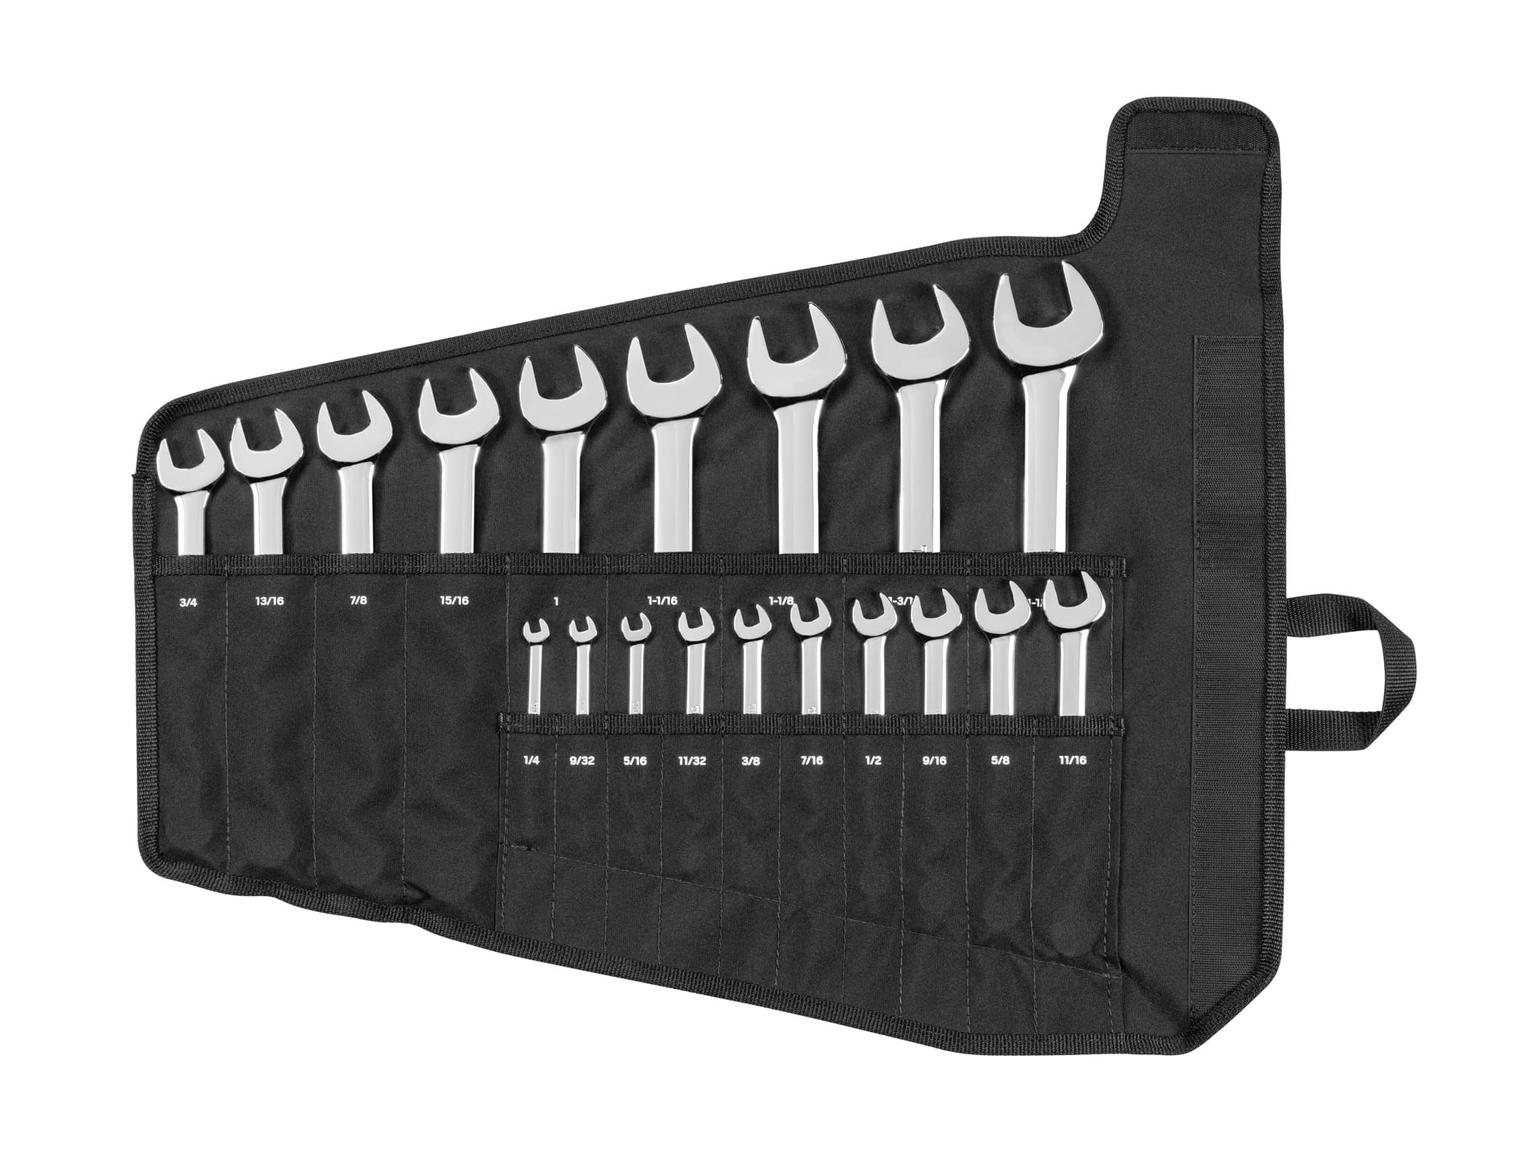 TEKTON WCB94103-T Combination Wrench Set with Pouch, 19-Piece (1/4 - 1-1/4 in.)